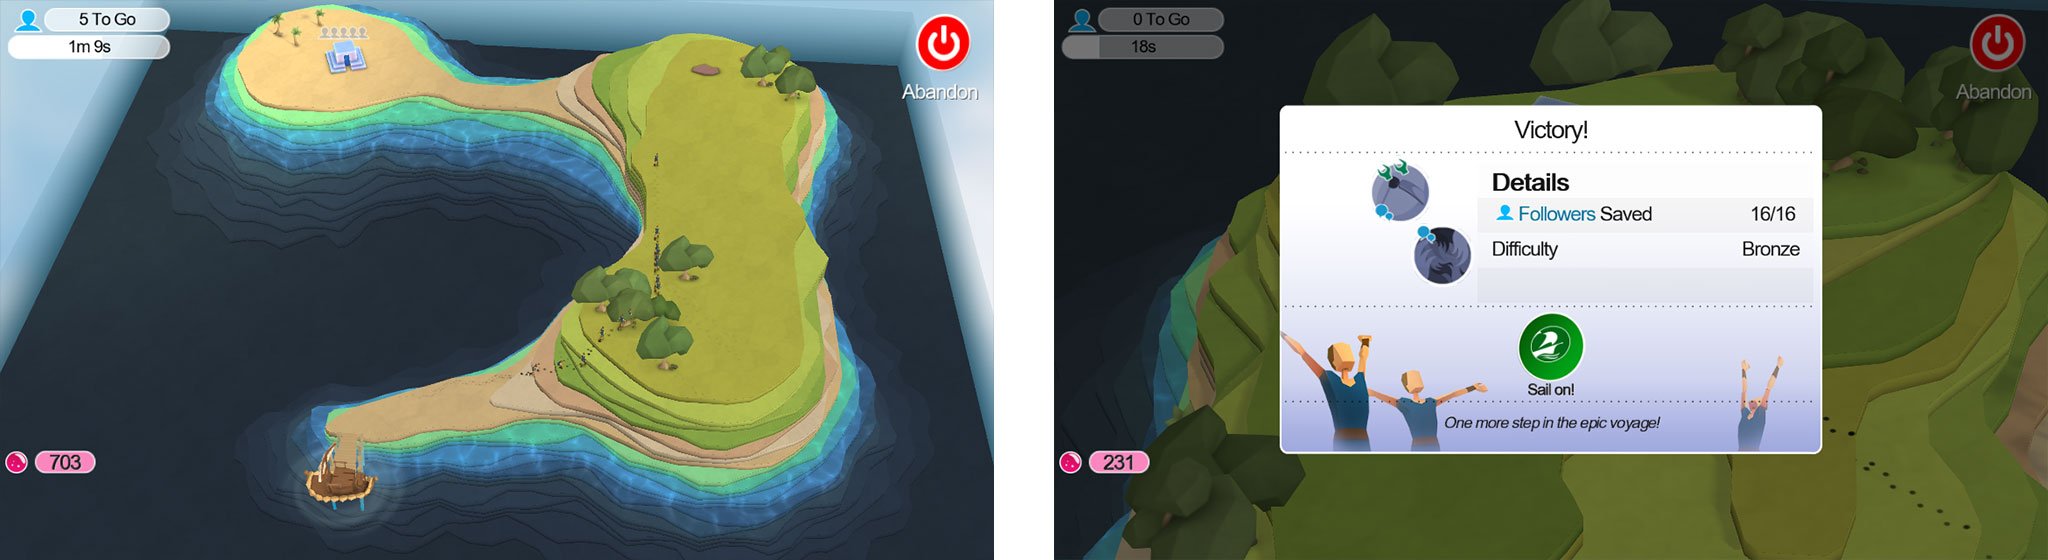 Godus: Top 10 tips, hints, and cheats you need to know!